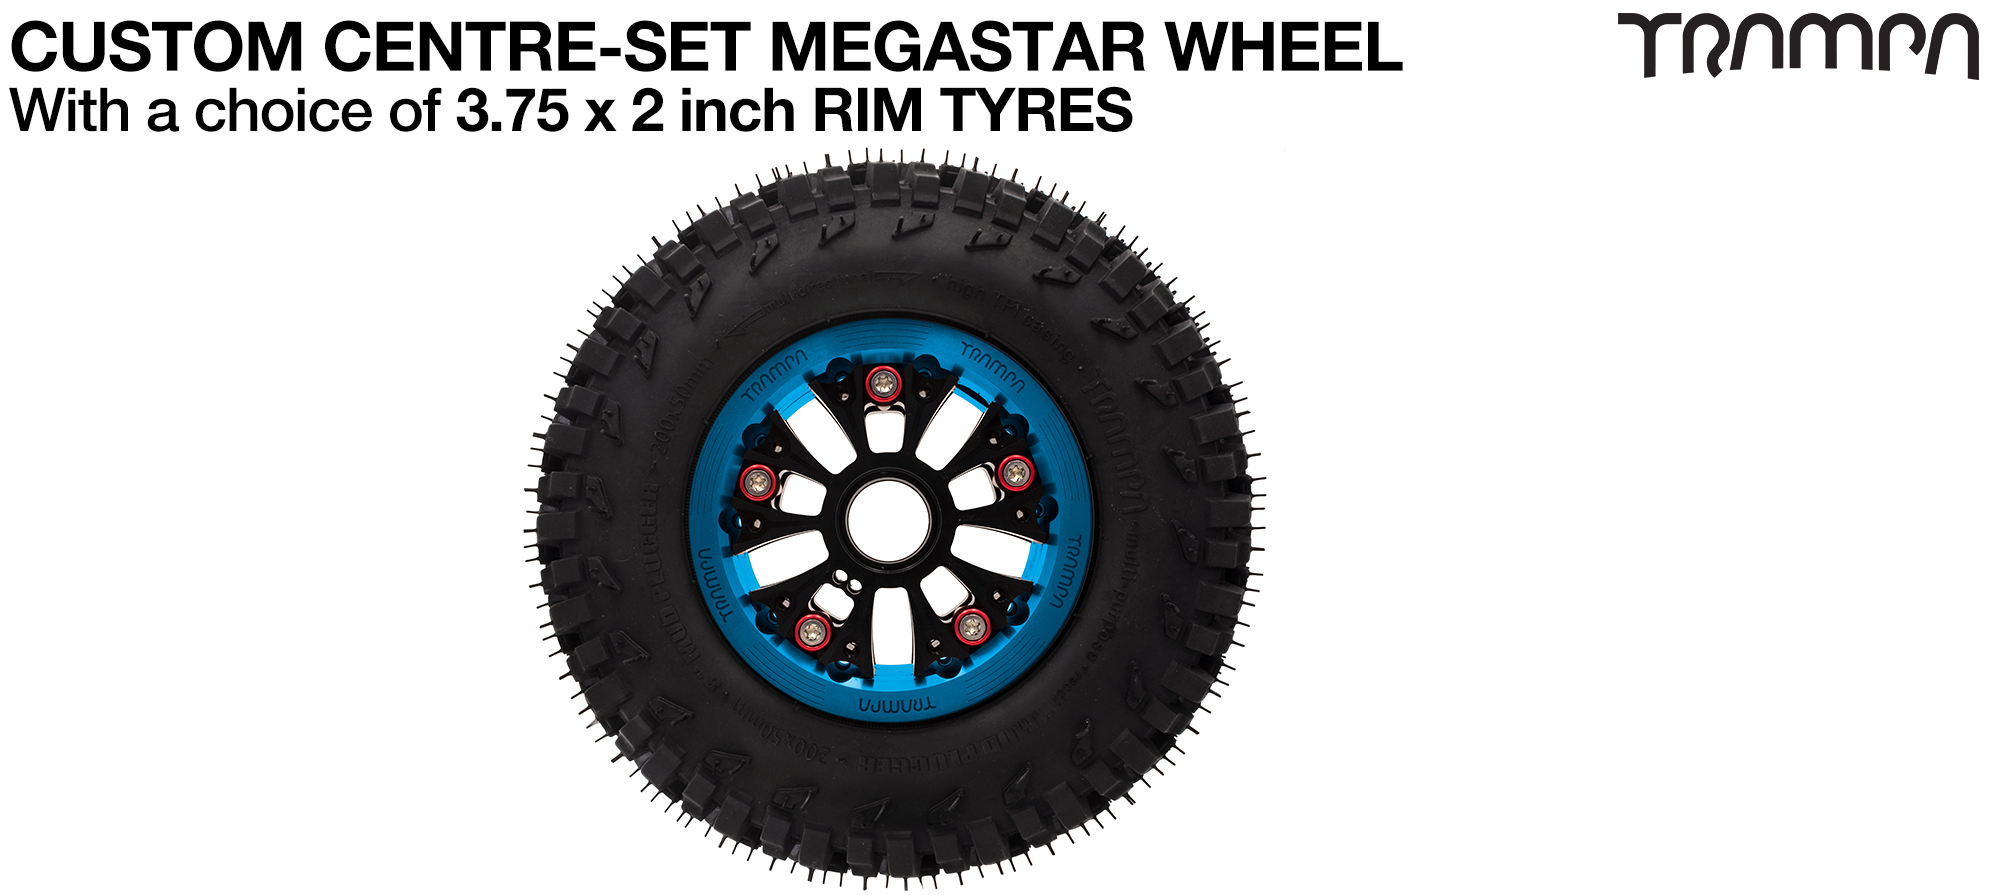 MEGASTAR 8 CENTRE-SET Wheels will fit any Tire TRAMPA offers up to 8 inches in Diameter - MUD-PLUGGER